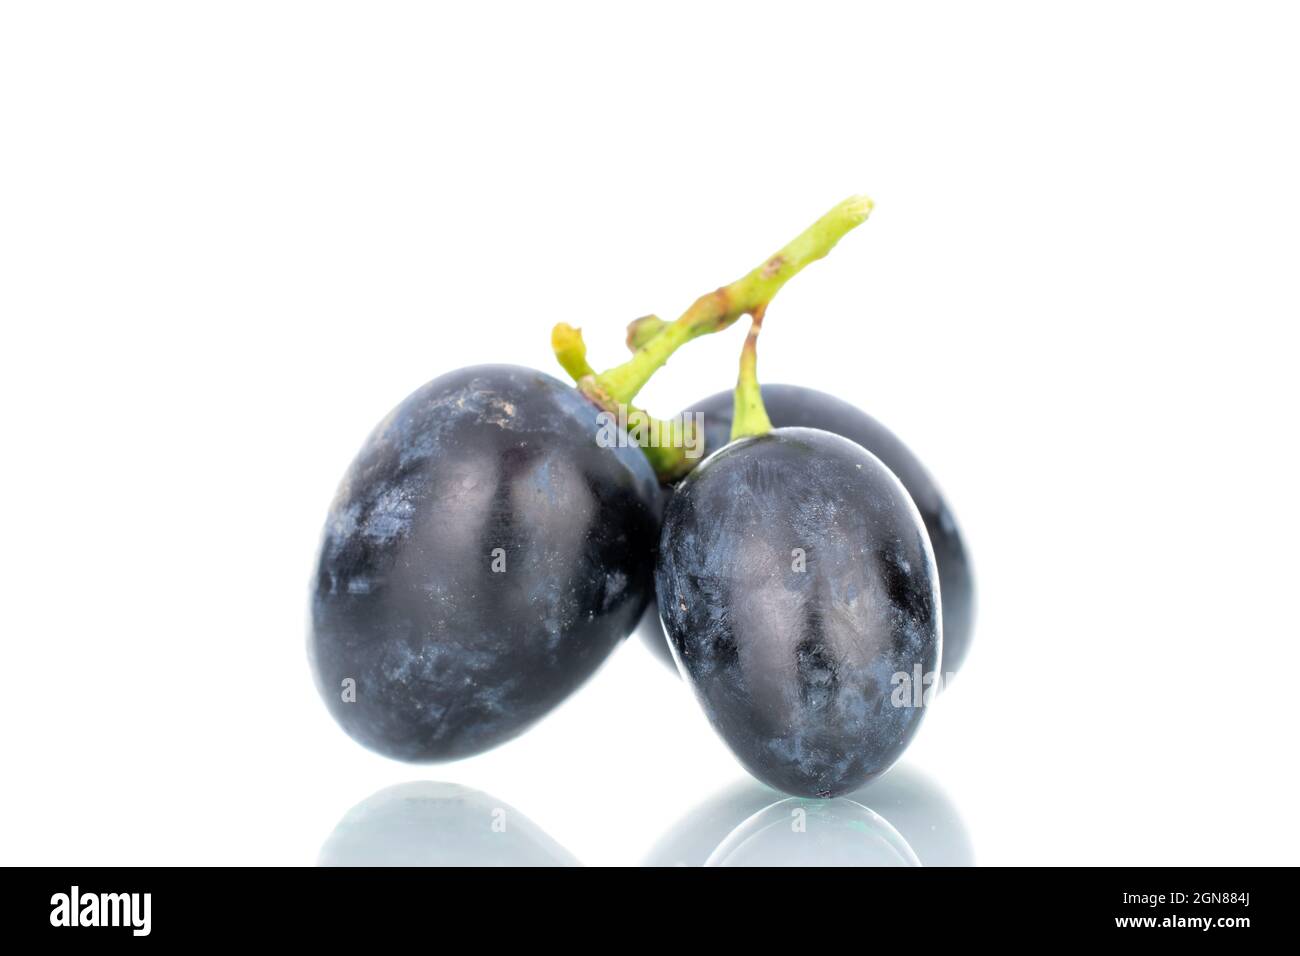 Three berries of ripe black grapes, close-up, isolated on white. Stock Photo